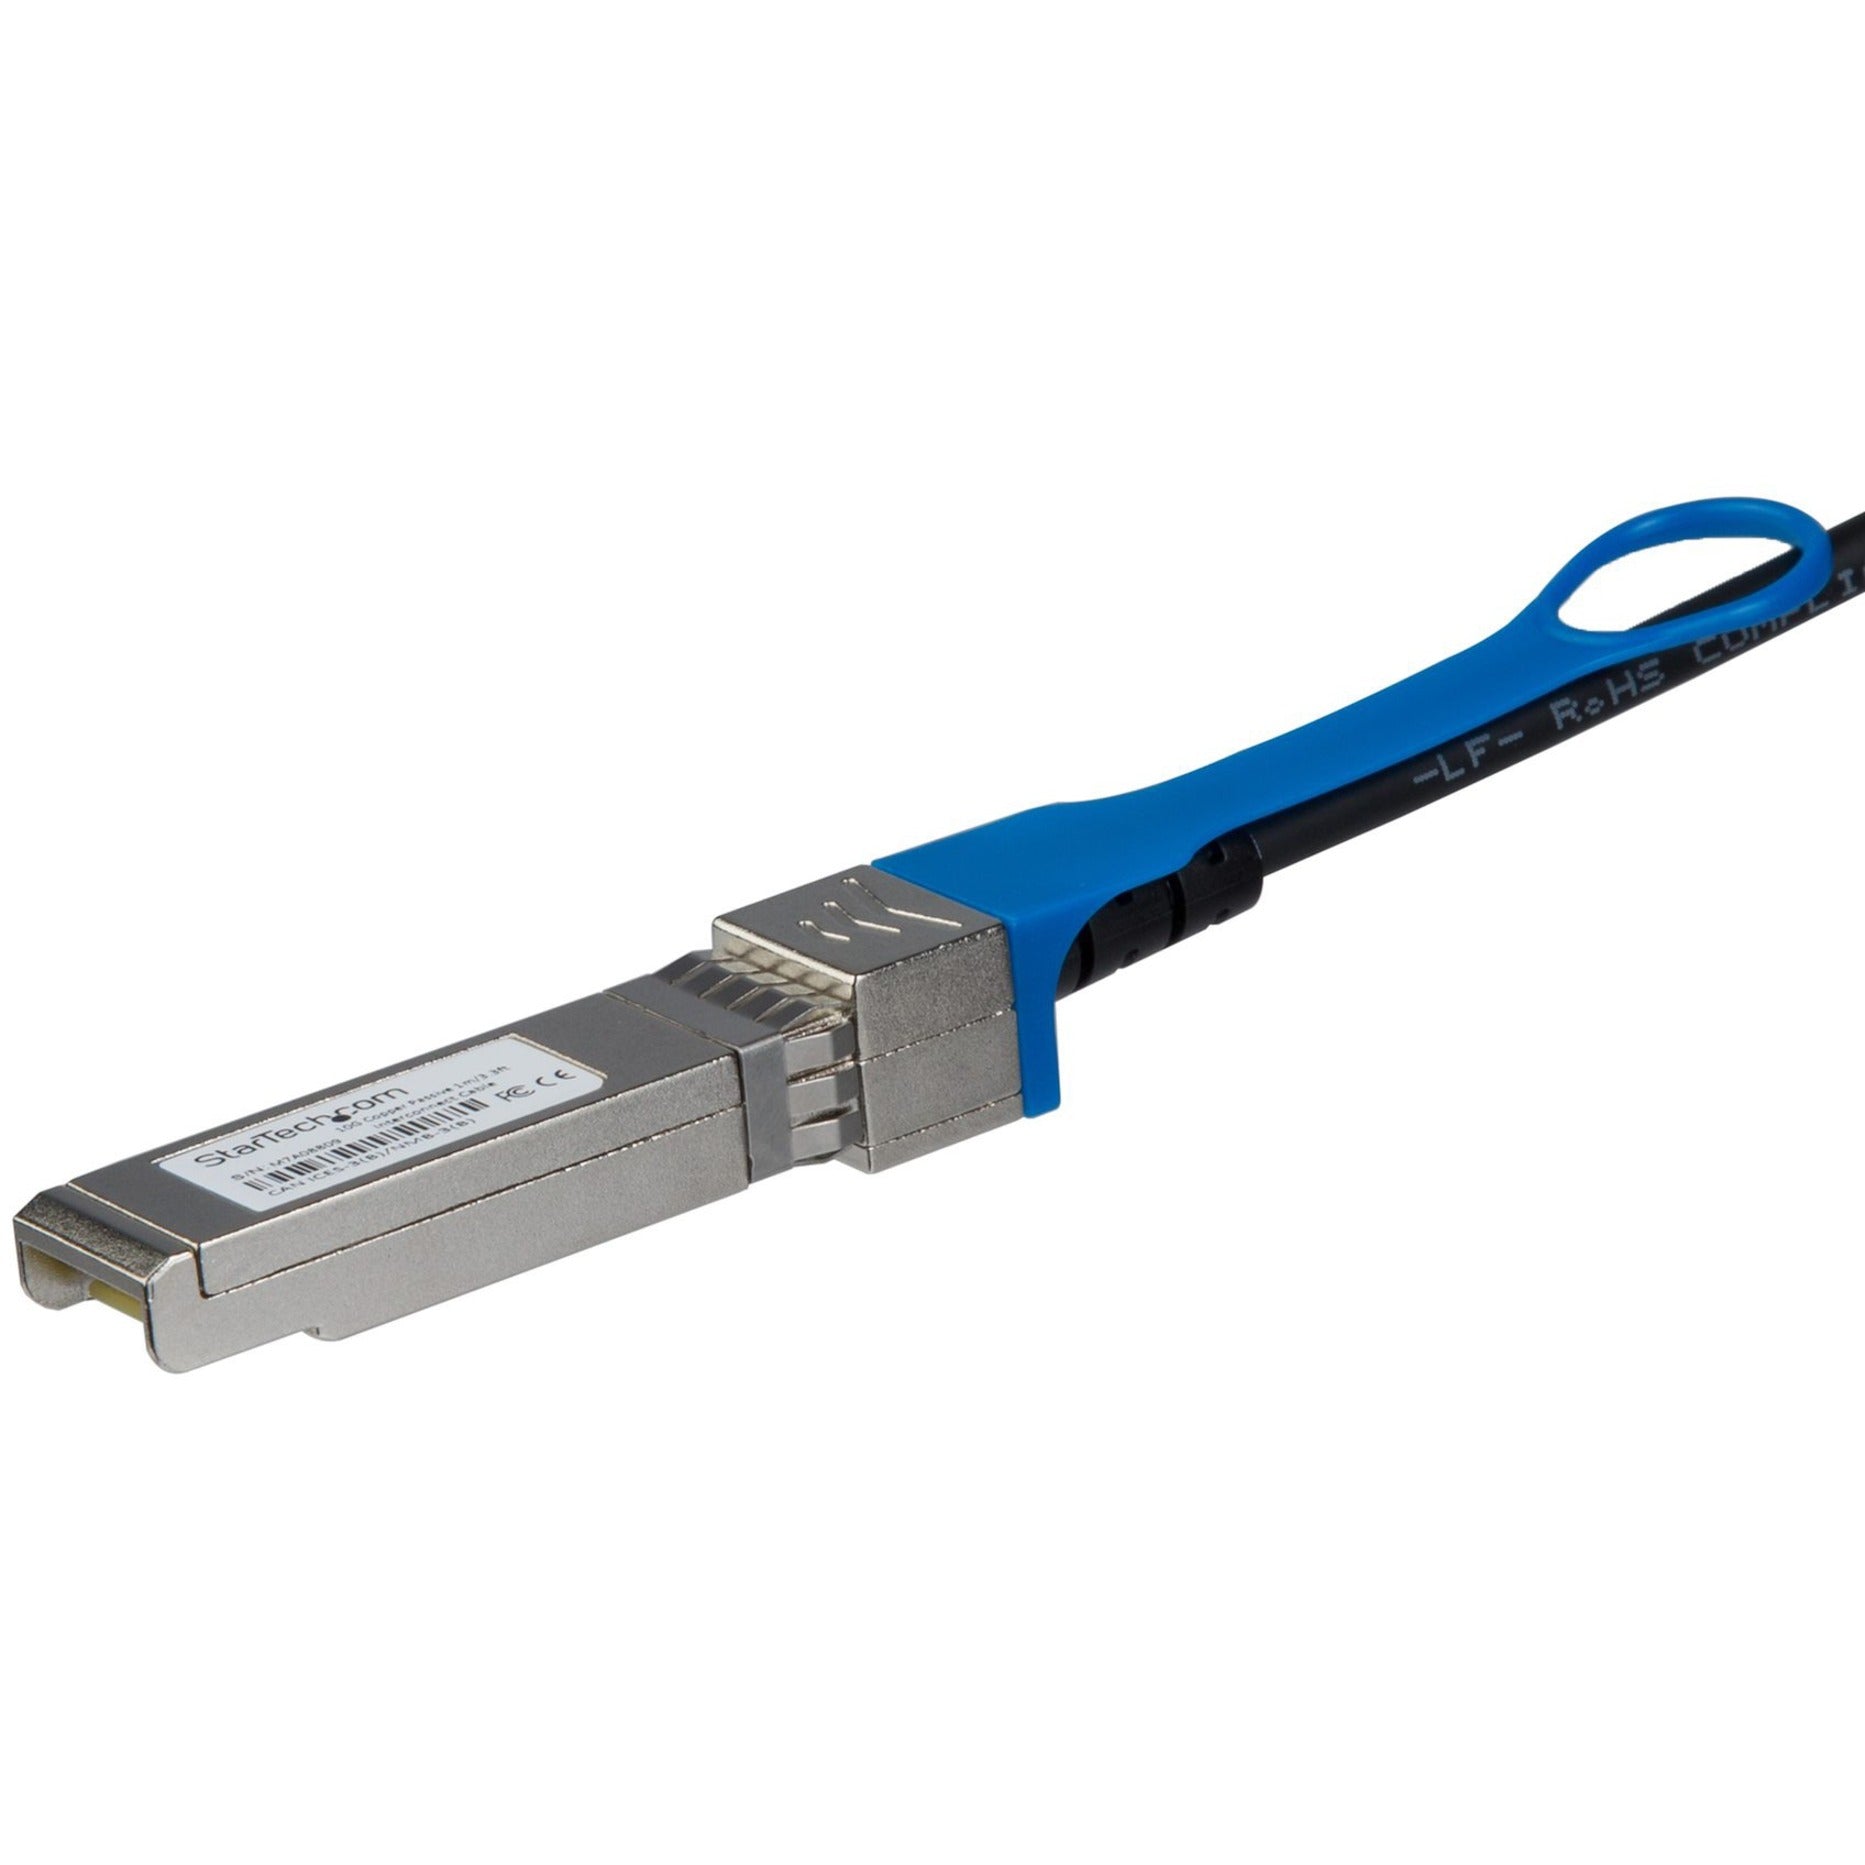 StarTech.com J9283BST Twinaxial Network Cable, 10 Gbit/s, 9.84 ft, SFP+ Male to SFP+ Male